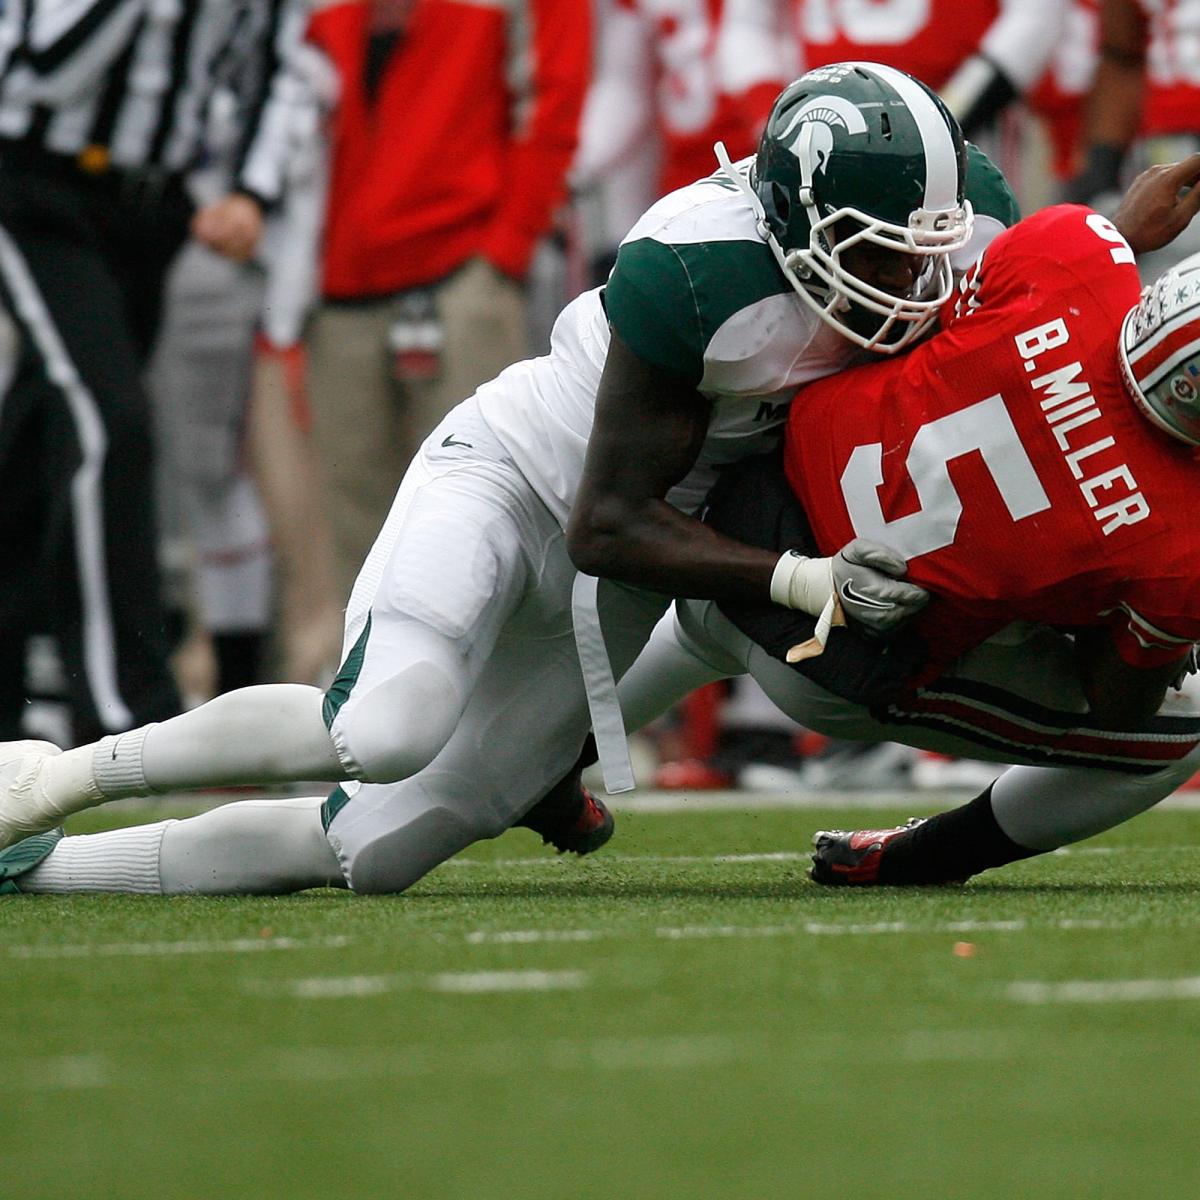 Ohio State Football: Are the Buckeyes Primed for Another Big Ten